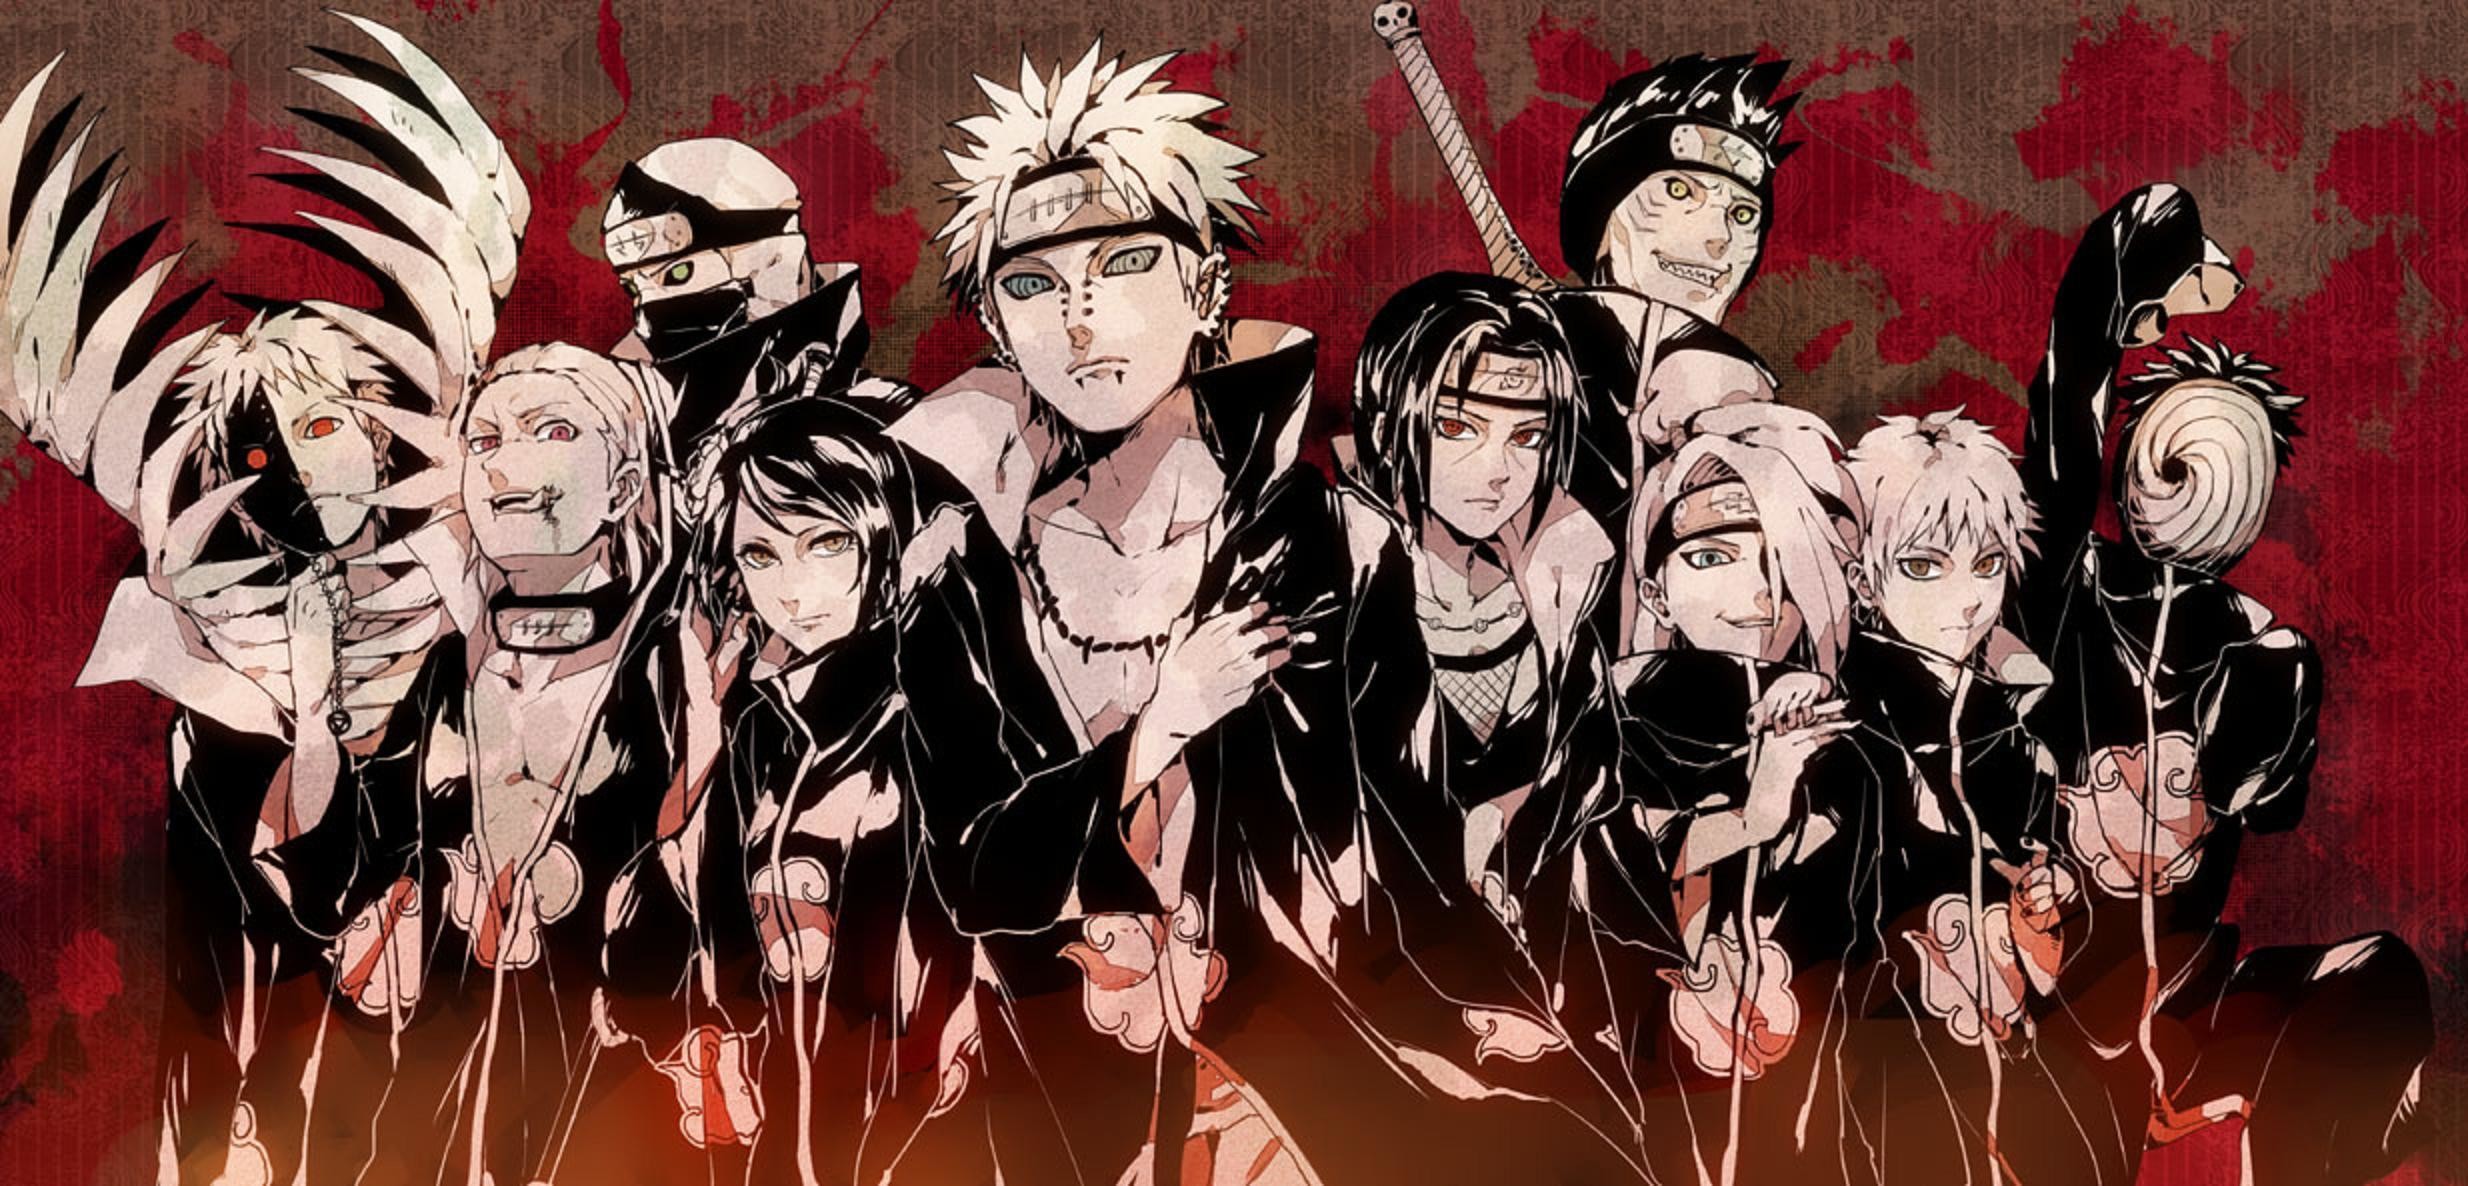 Akatsuki wallpaper i made last try in this style if it doesnt get much  Ill change back to the manga style  rNaruto